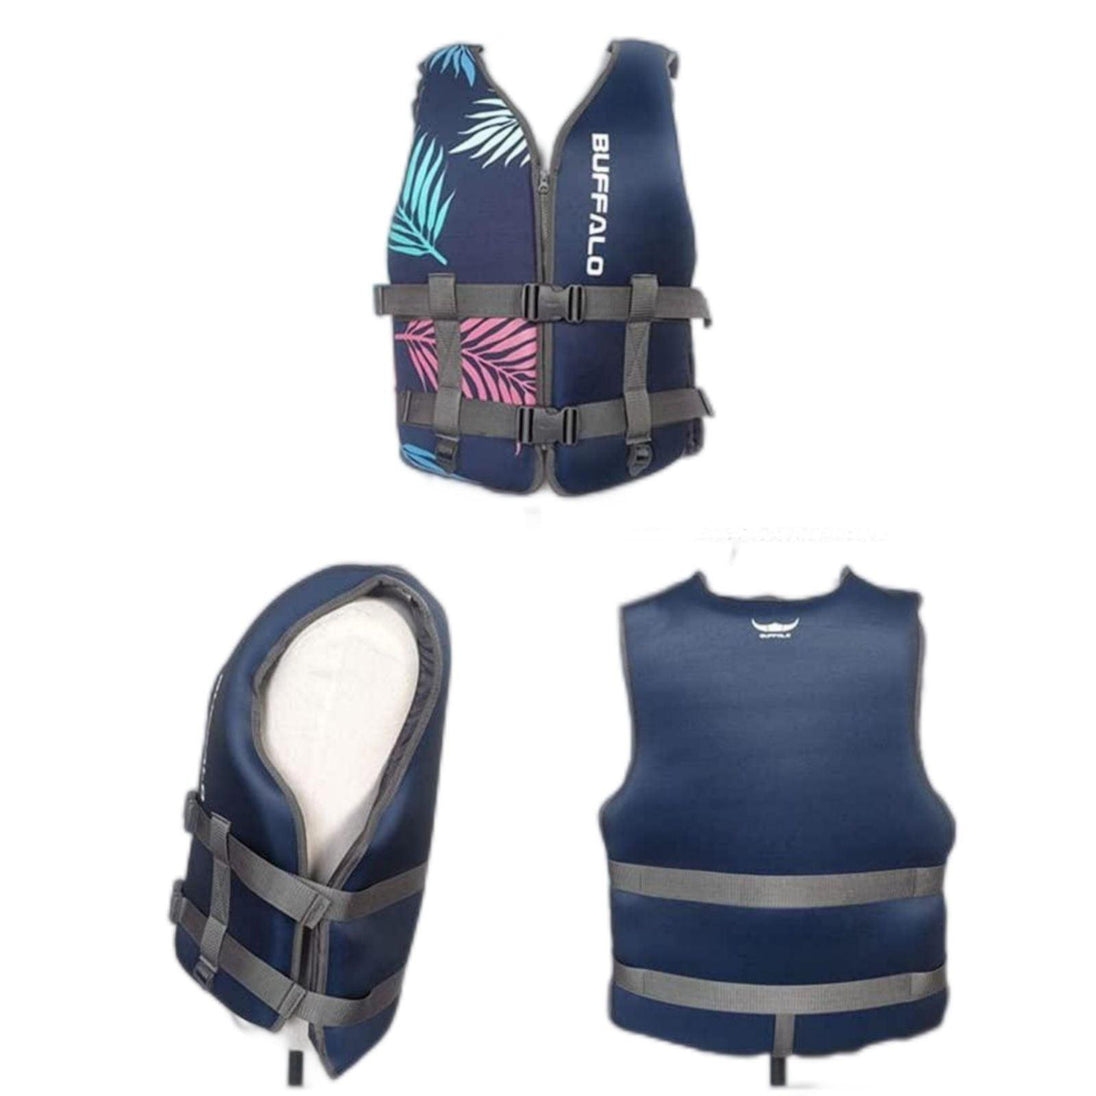 Buy Life Jacket for Unisex Adjustable Safety Breathable Life Vest for Men Women(Blue-L) discounted | Products On Sale Australia